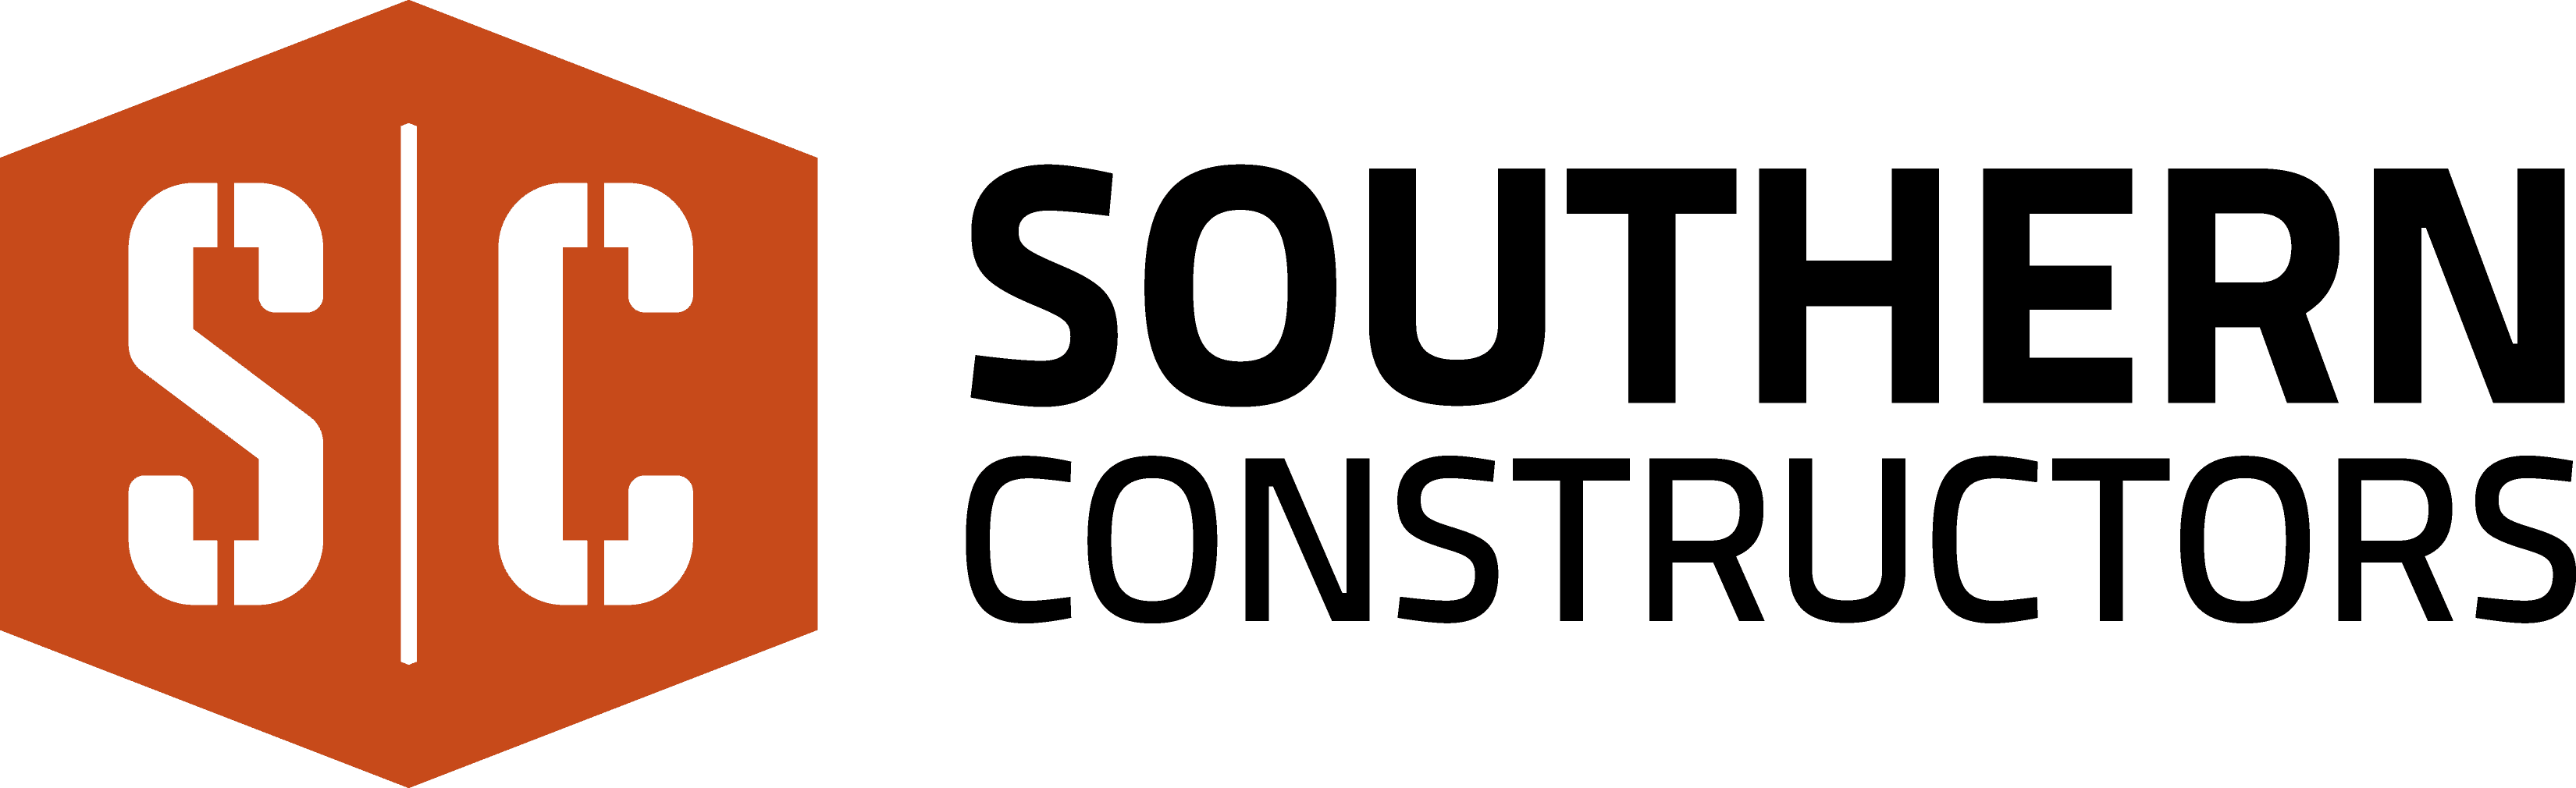 Southern Constructors